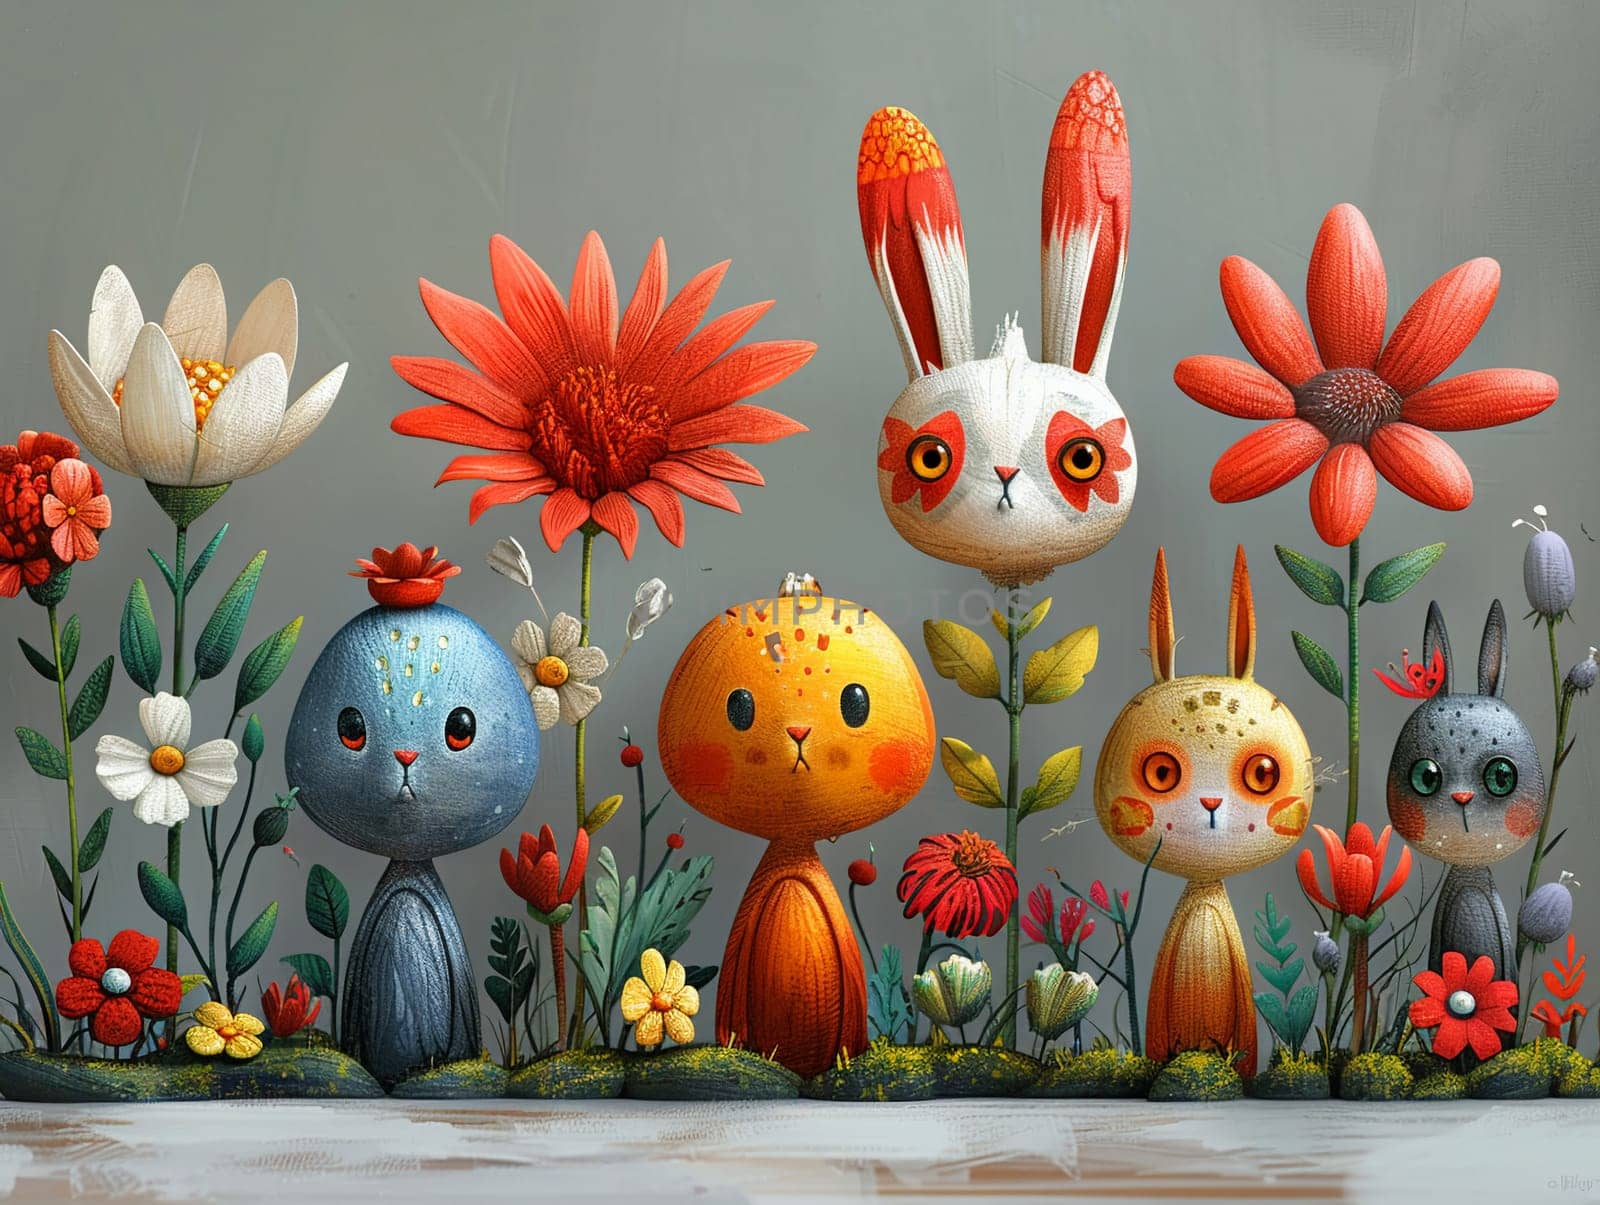 Flower-themed whimsical character designs, creative elements with personalities as vibrant as their floral inspirations.